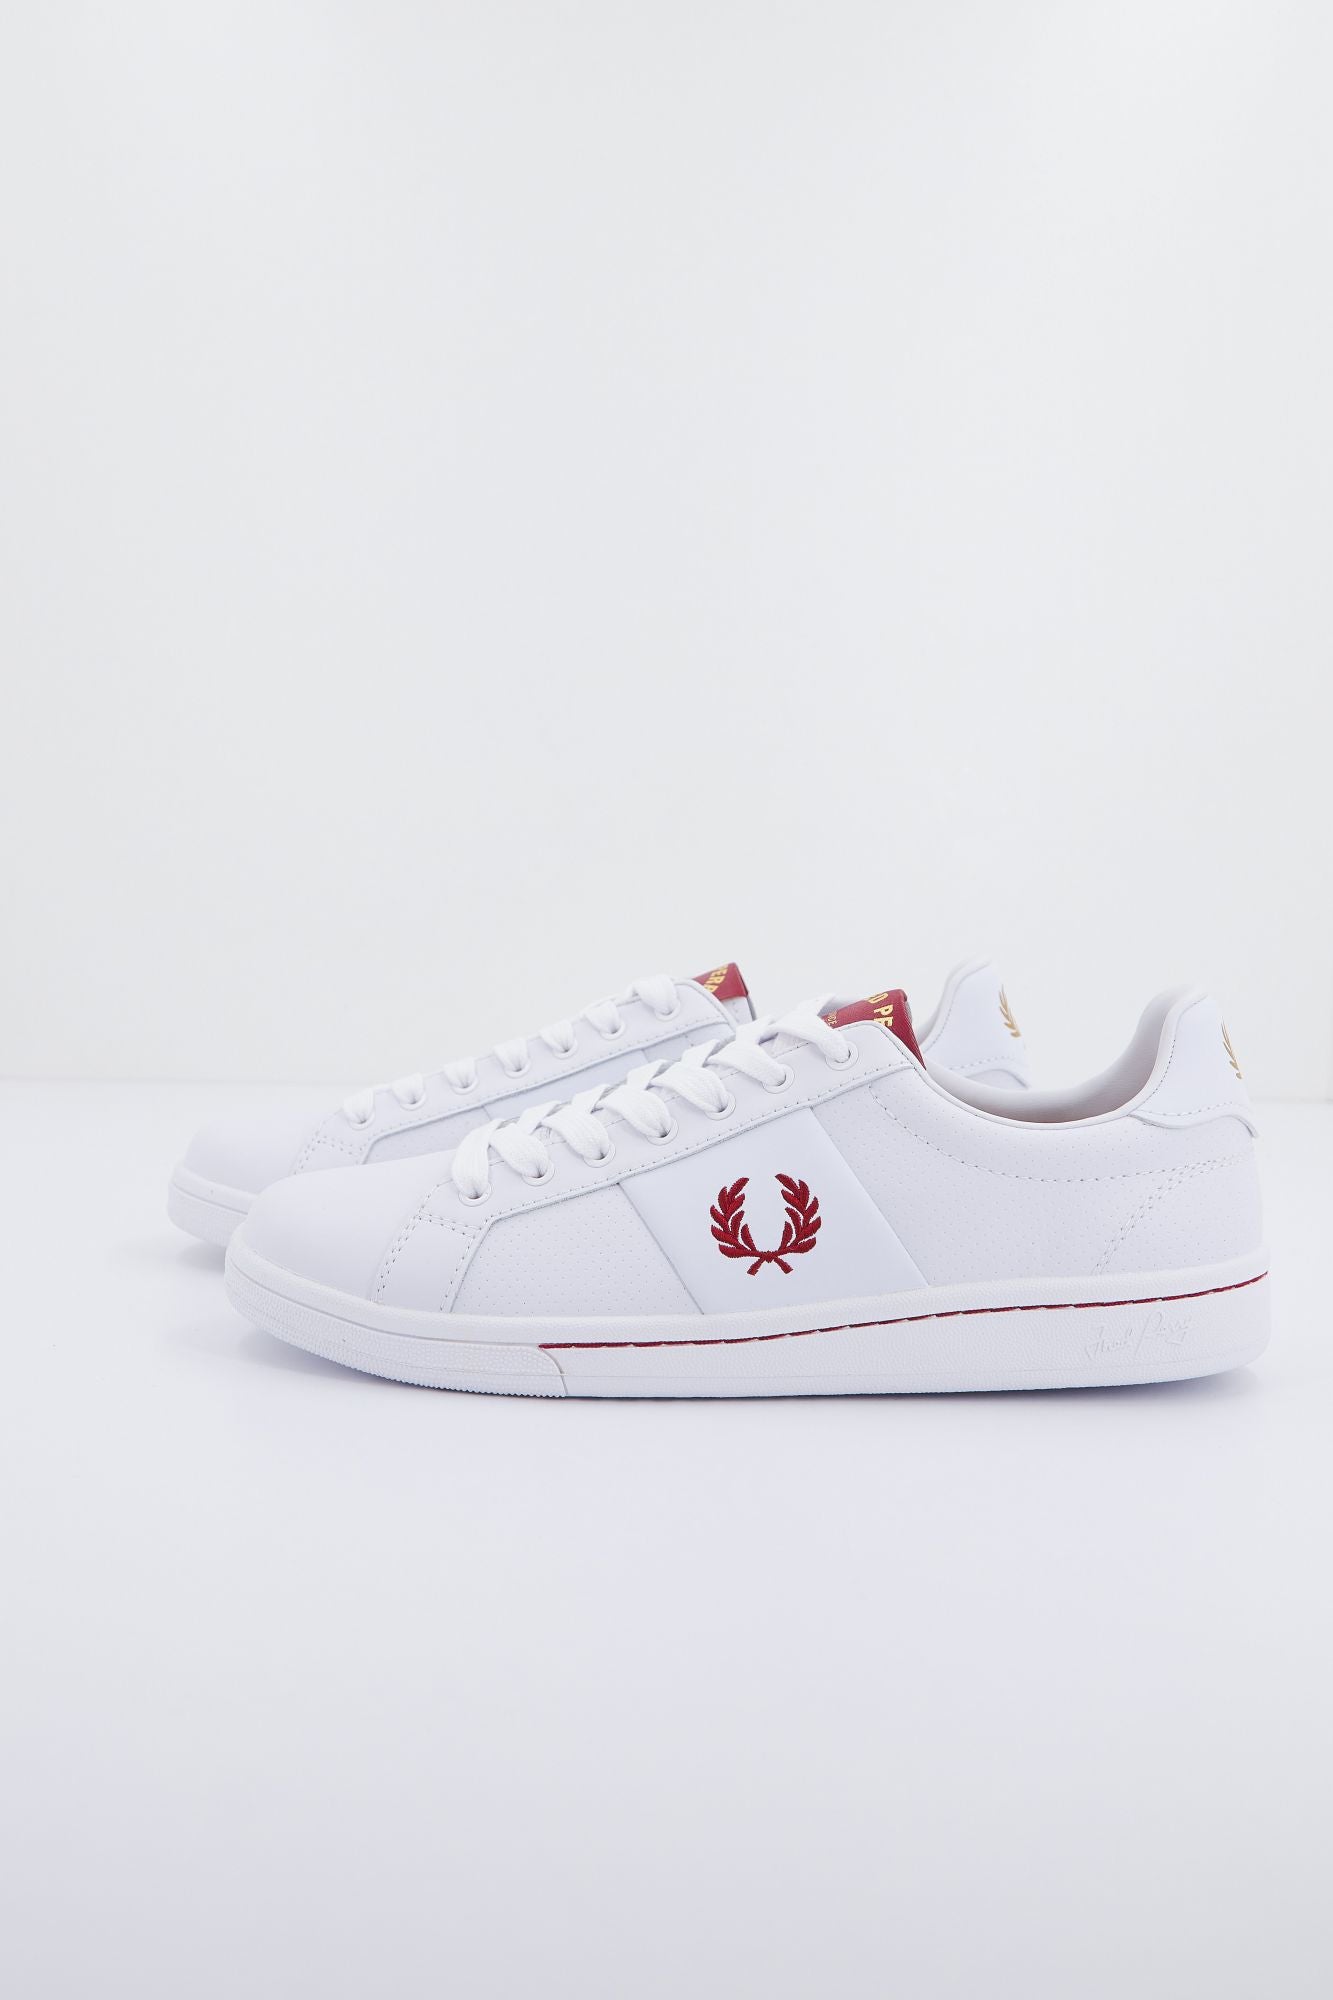 FRED PERRY PERF LEATHER en color BLANCO (3)